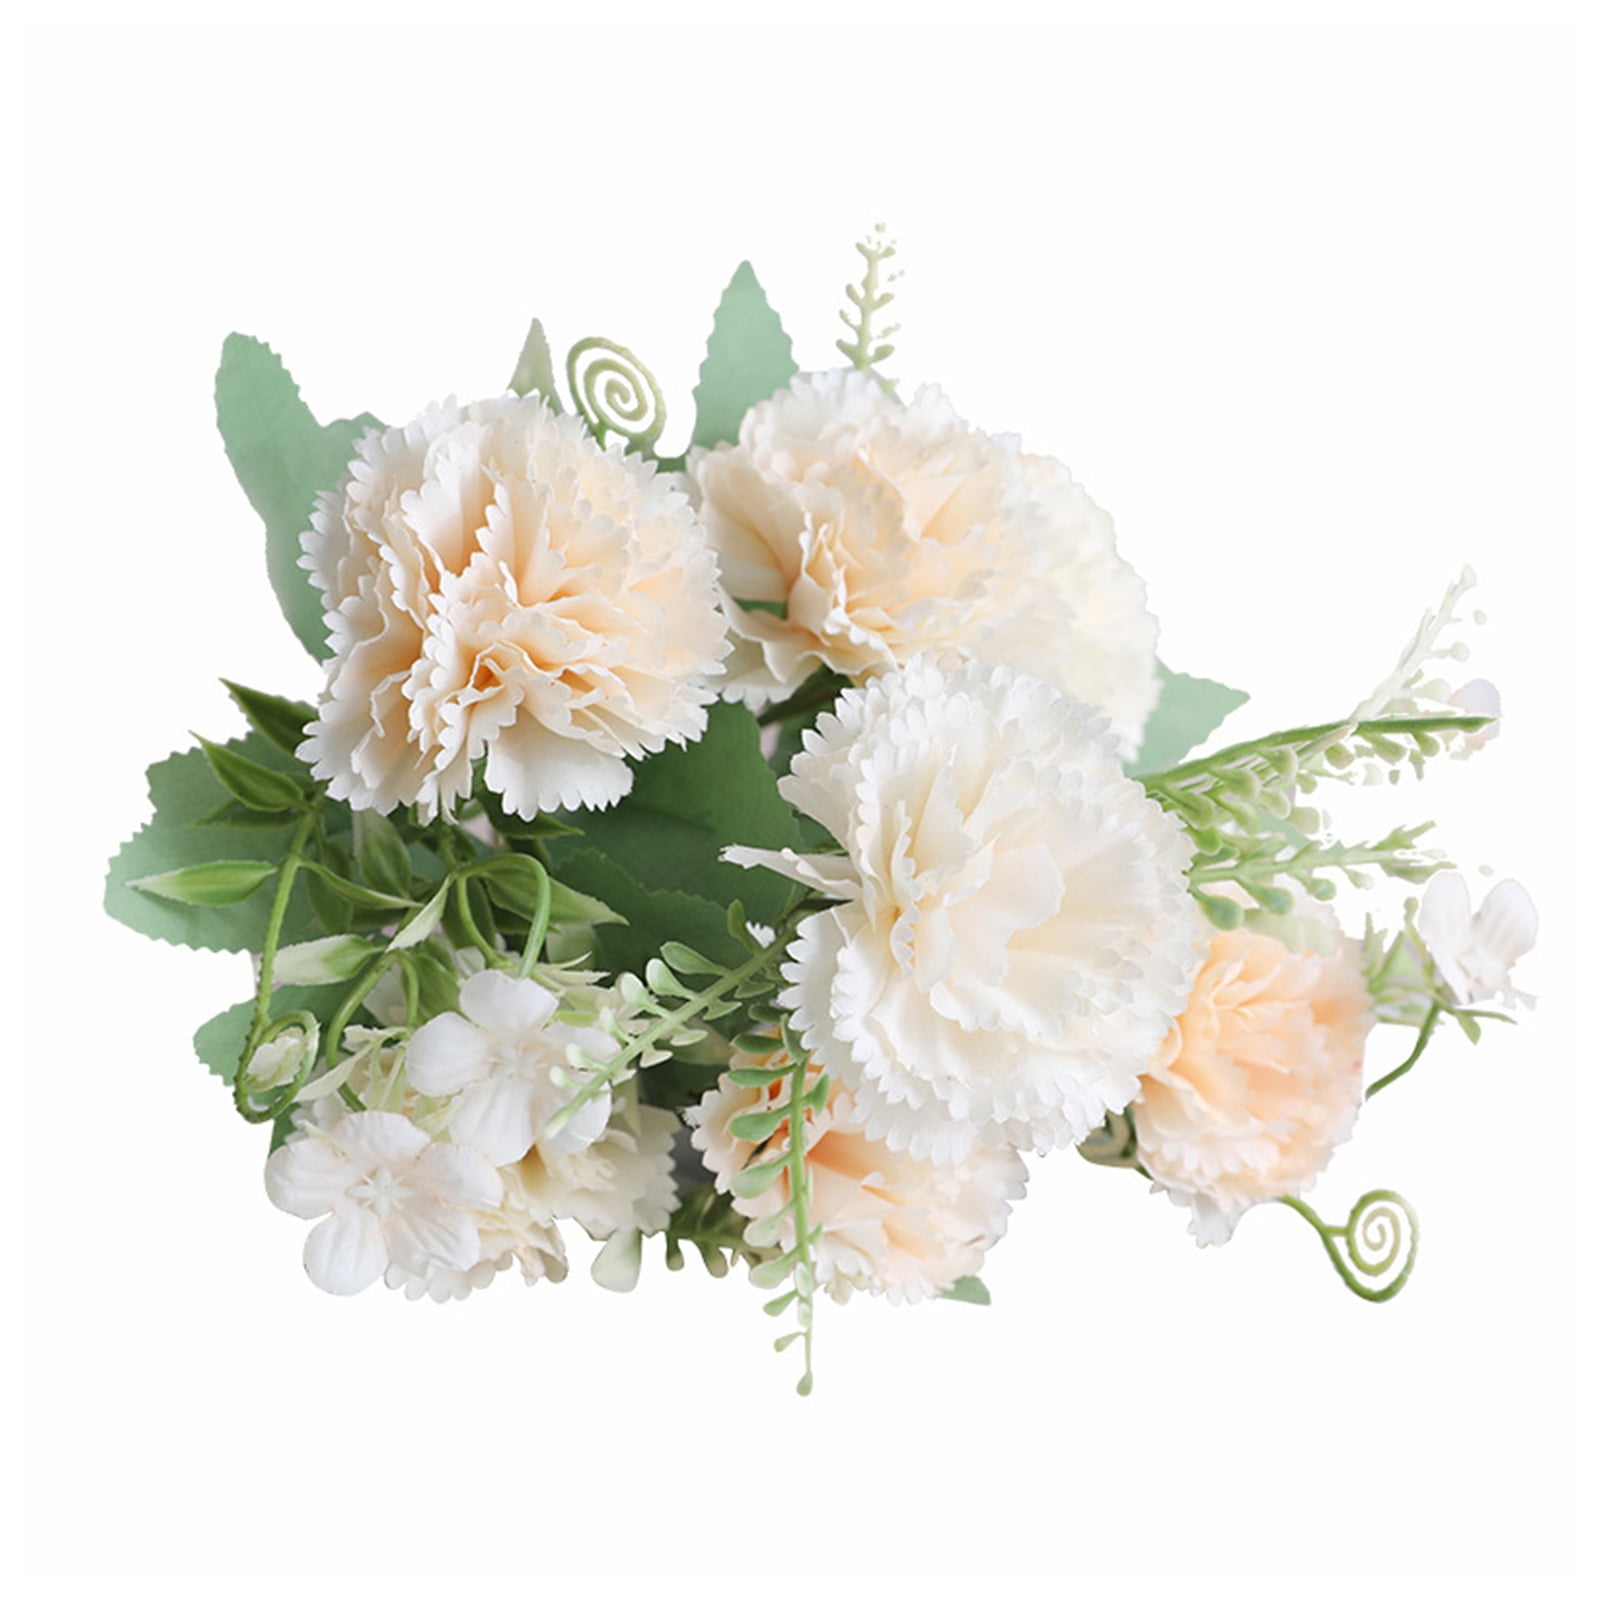 Artificial Flowers Carnations Simulation 7 Heads Vivid for Mother's Day Proper 